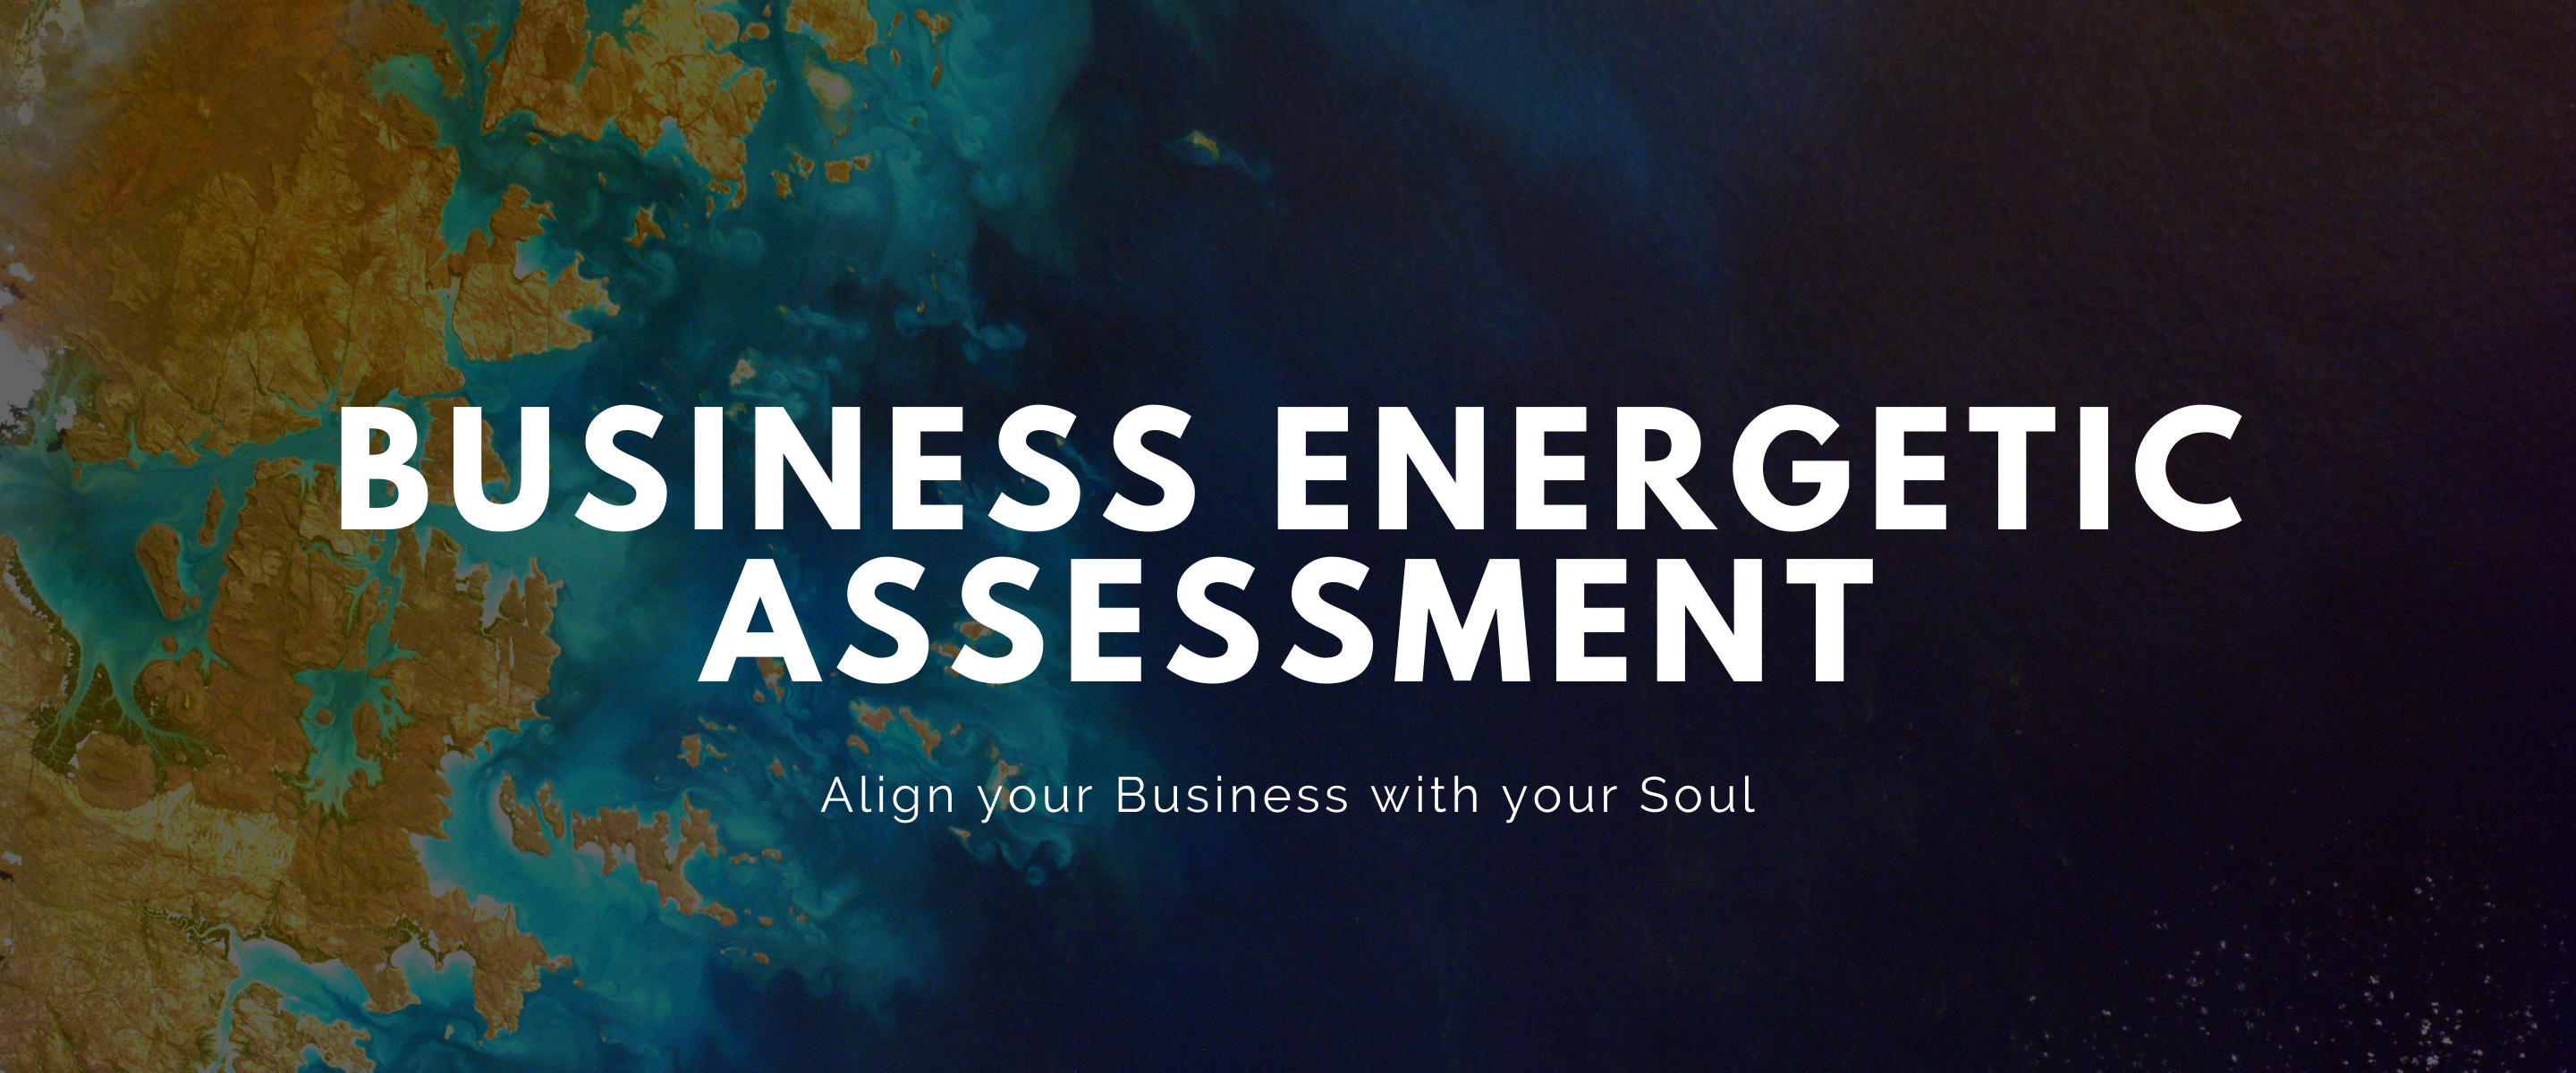 Business Energetic Assessment (2880 x 1200 px)